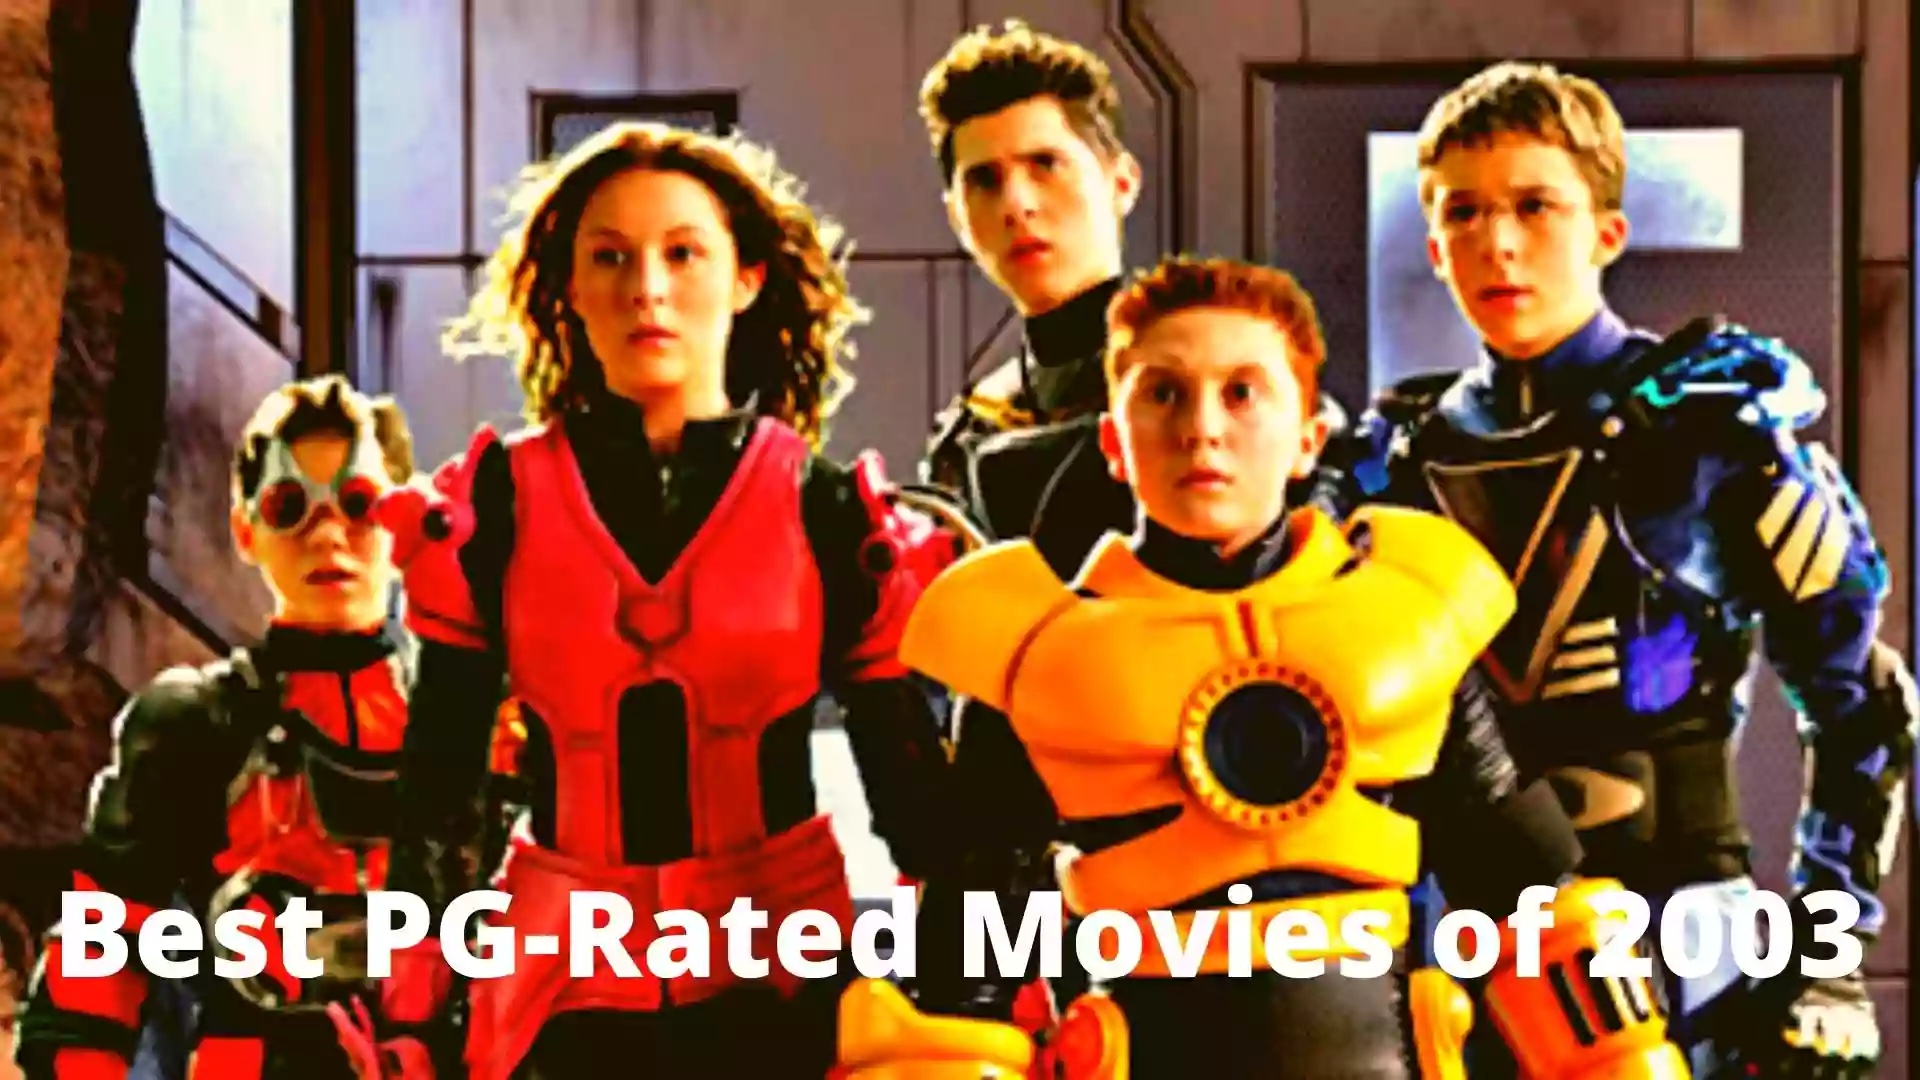 Best PG-Rated Movies of 2003